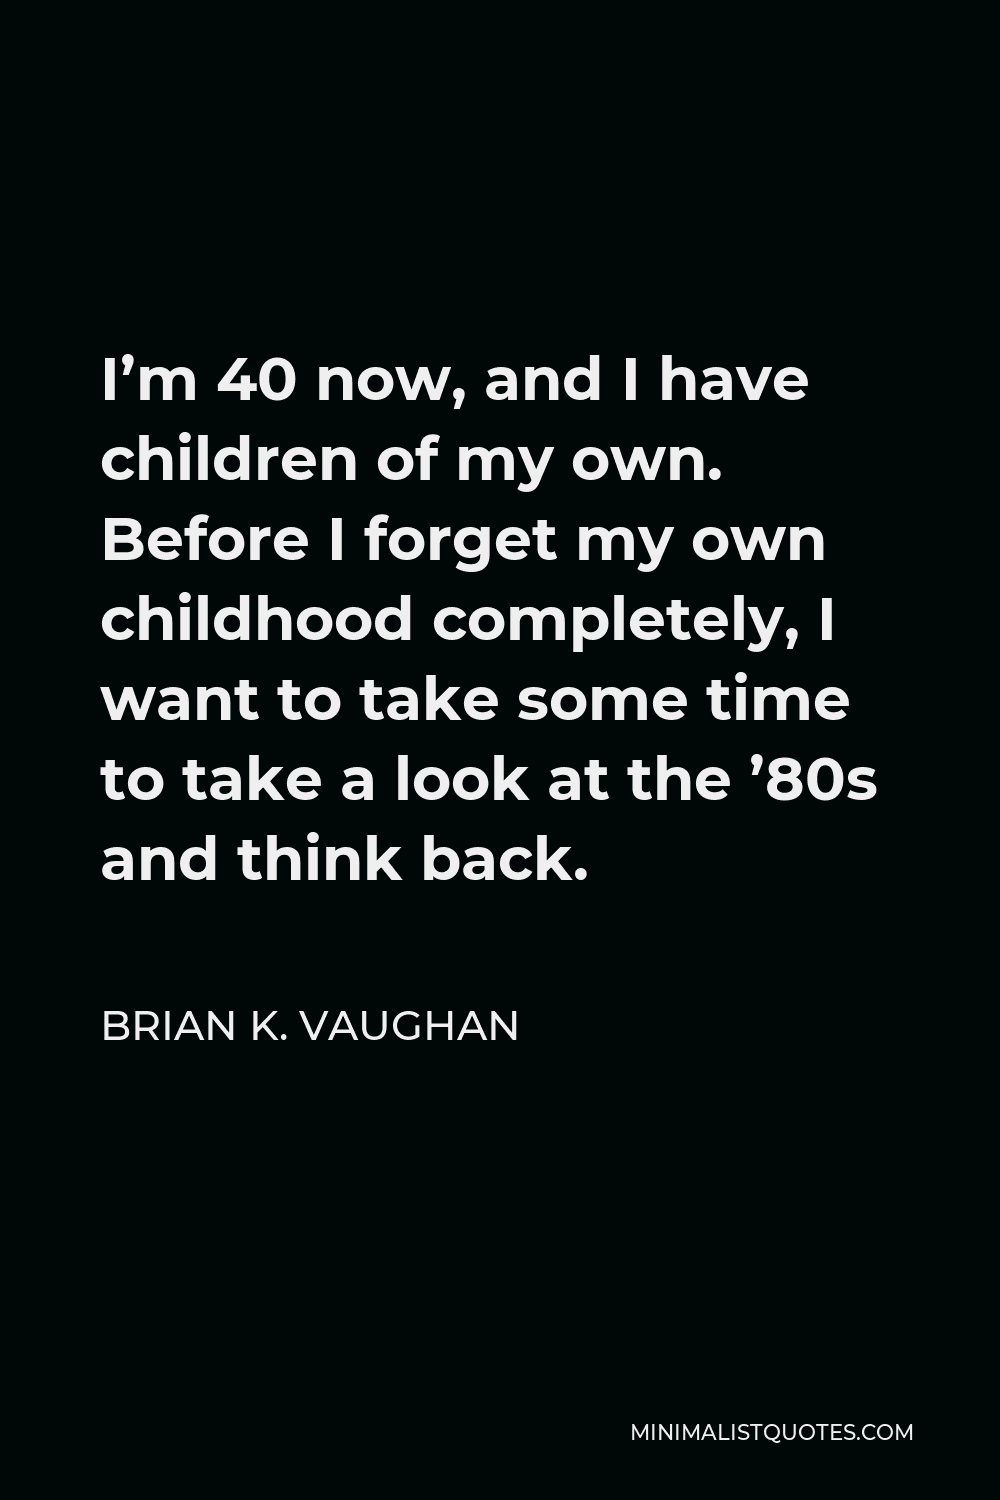 Brian K. Vaughan Quote - I’m 40 now, and I have children of my own. Before I forget my own childhood completely, I want to take some time to take a look at the ’80s and think back.